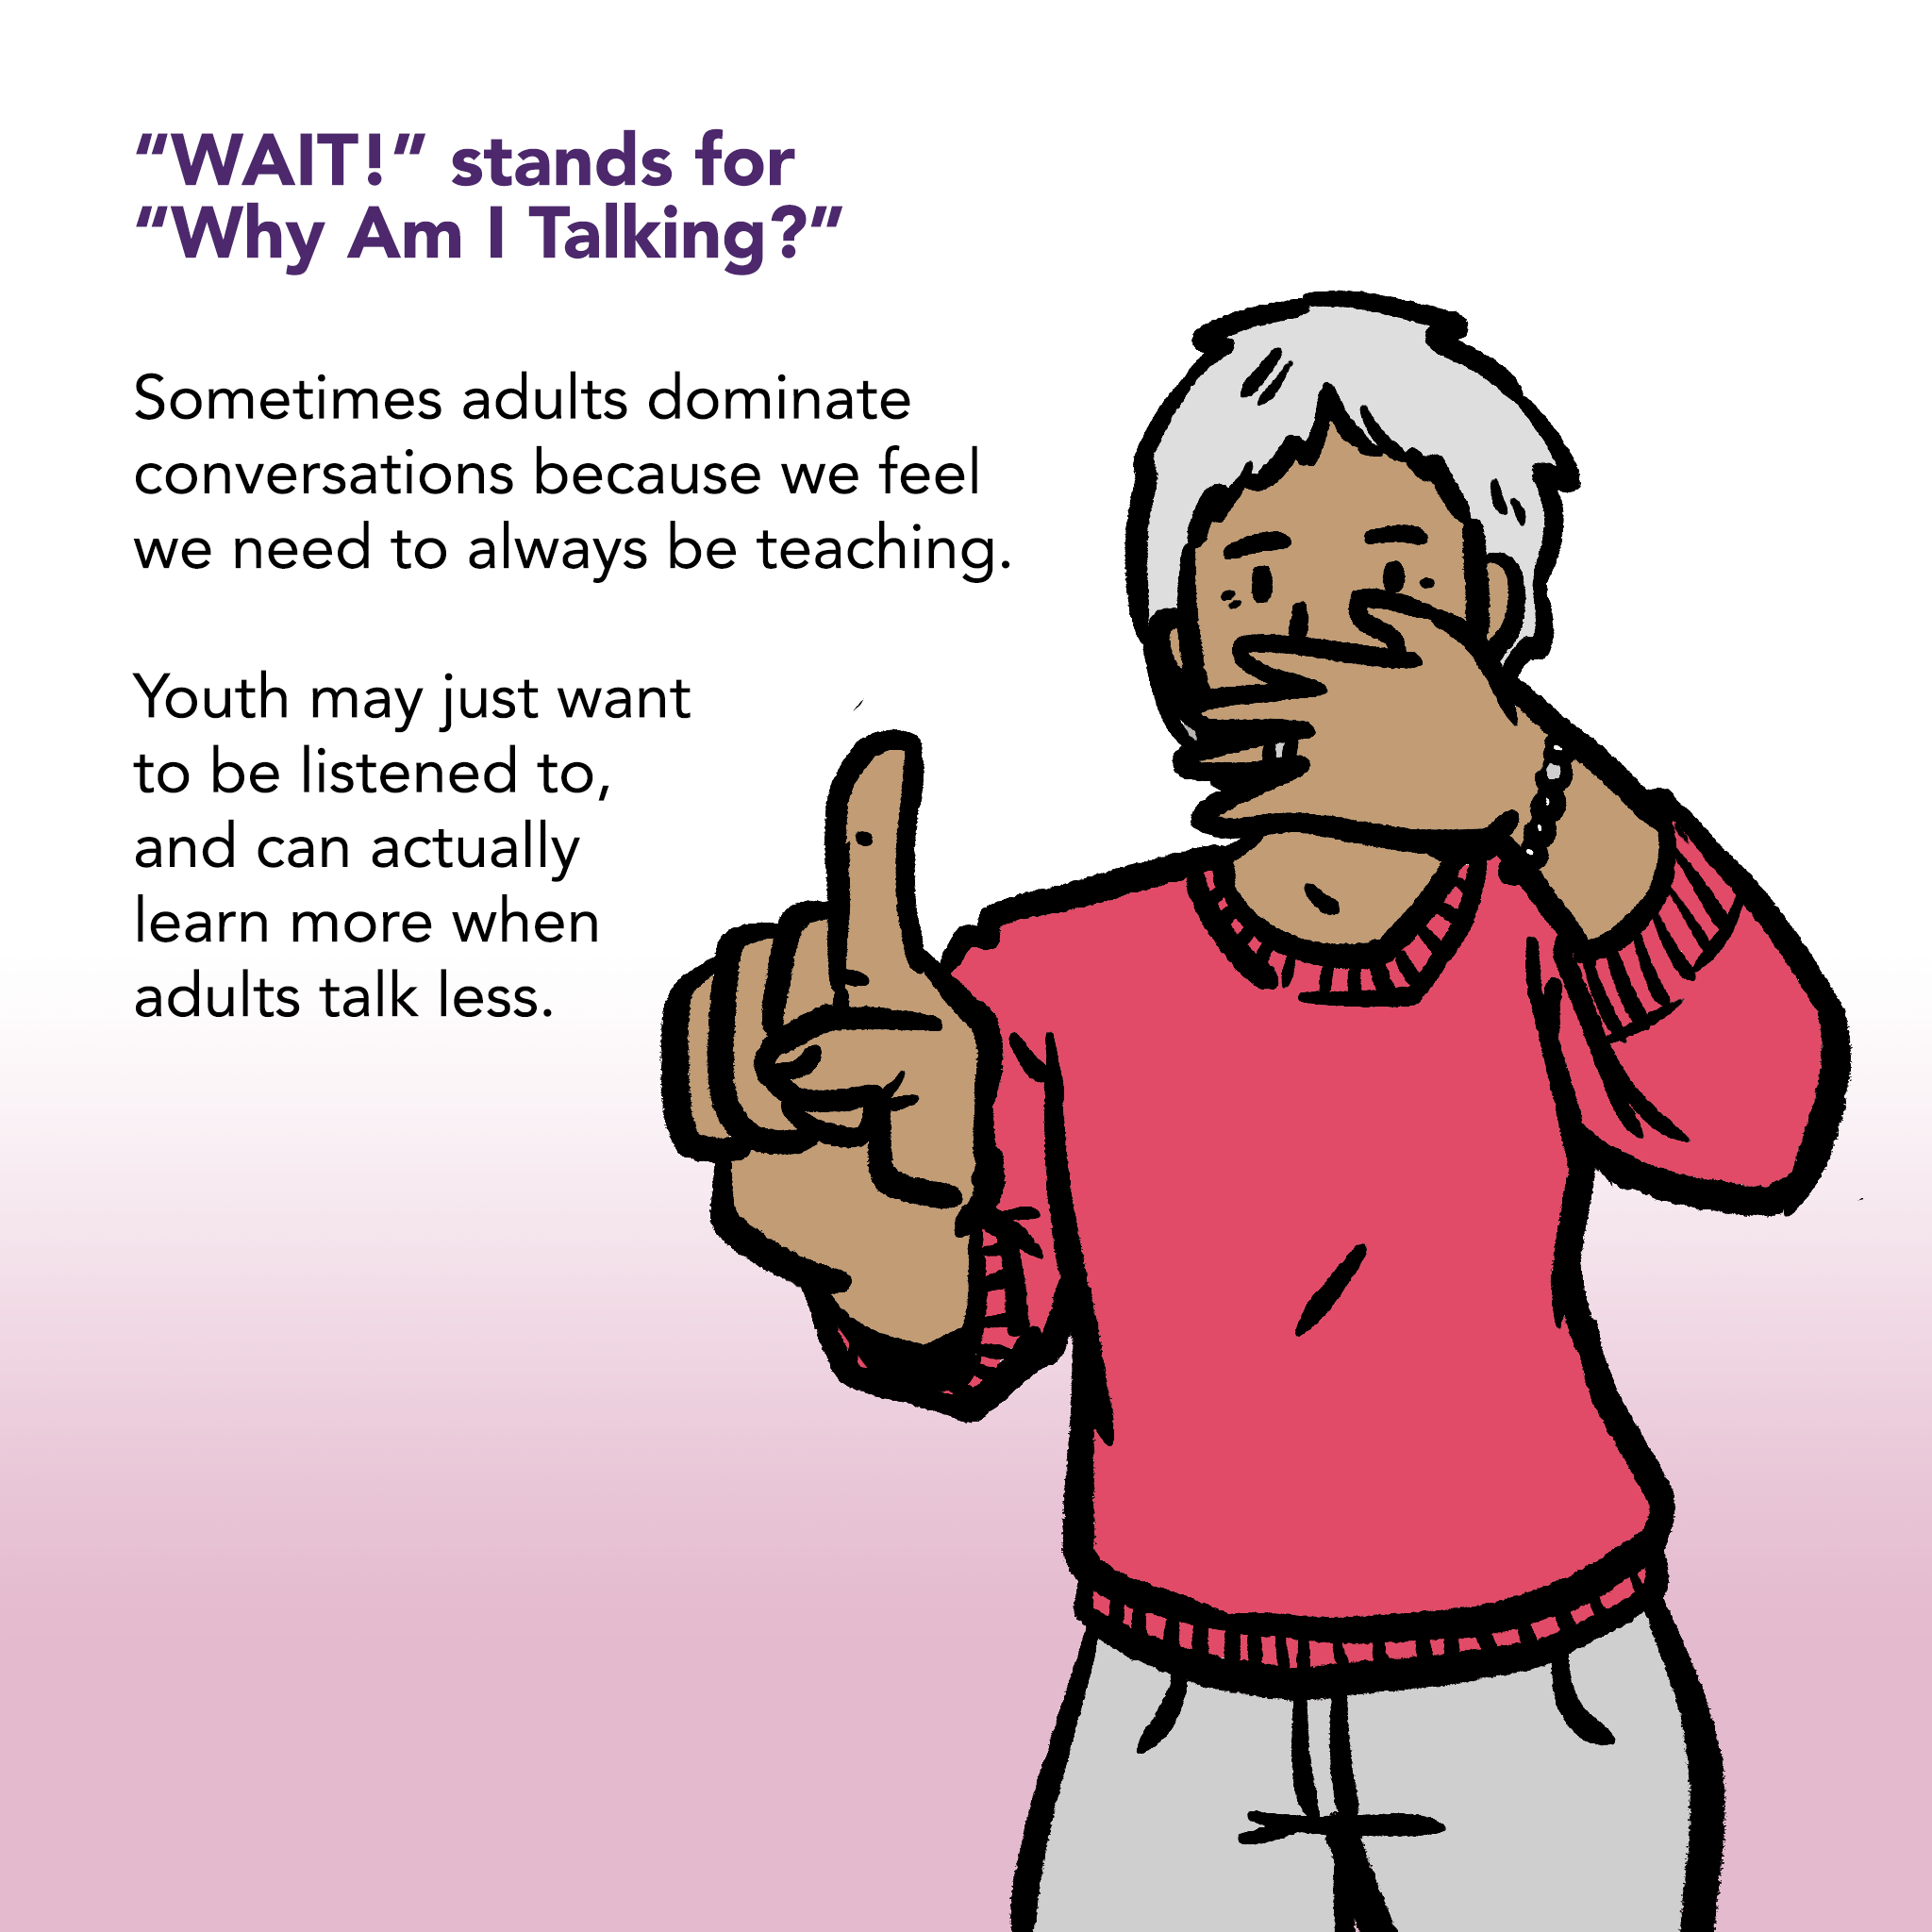 Illustration of an adult holding their hand over their mouth to remind themself to listen instead of talking. Caption says "'WAIT' stands for 'Why Am I Talking?' Sometimes adults dominate conversations because we feel we need to always be teaching. Youth may just want to be listened to, and can actually learn more when we adults talk less."